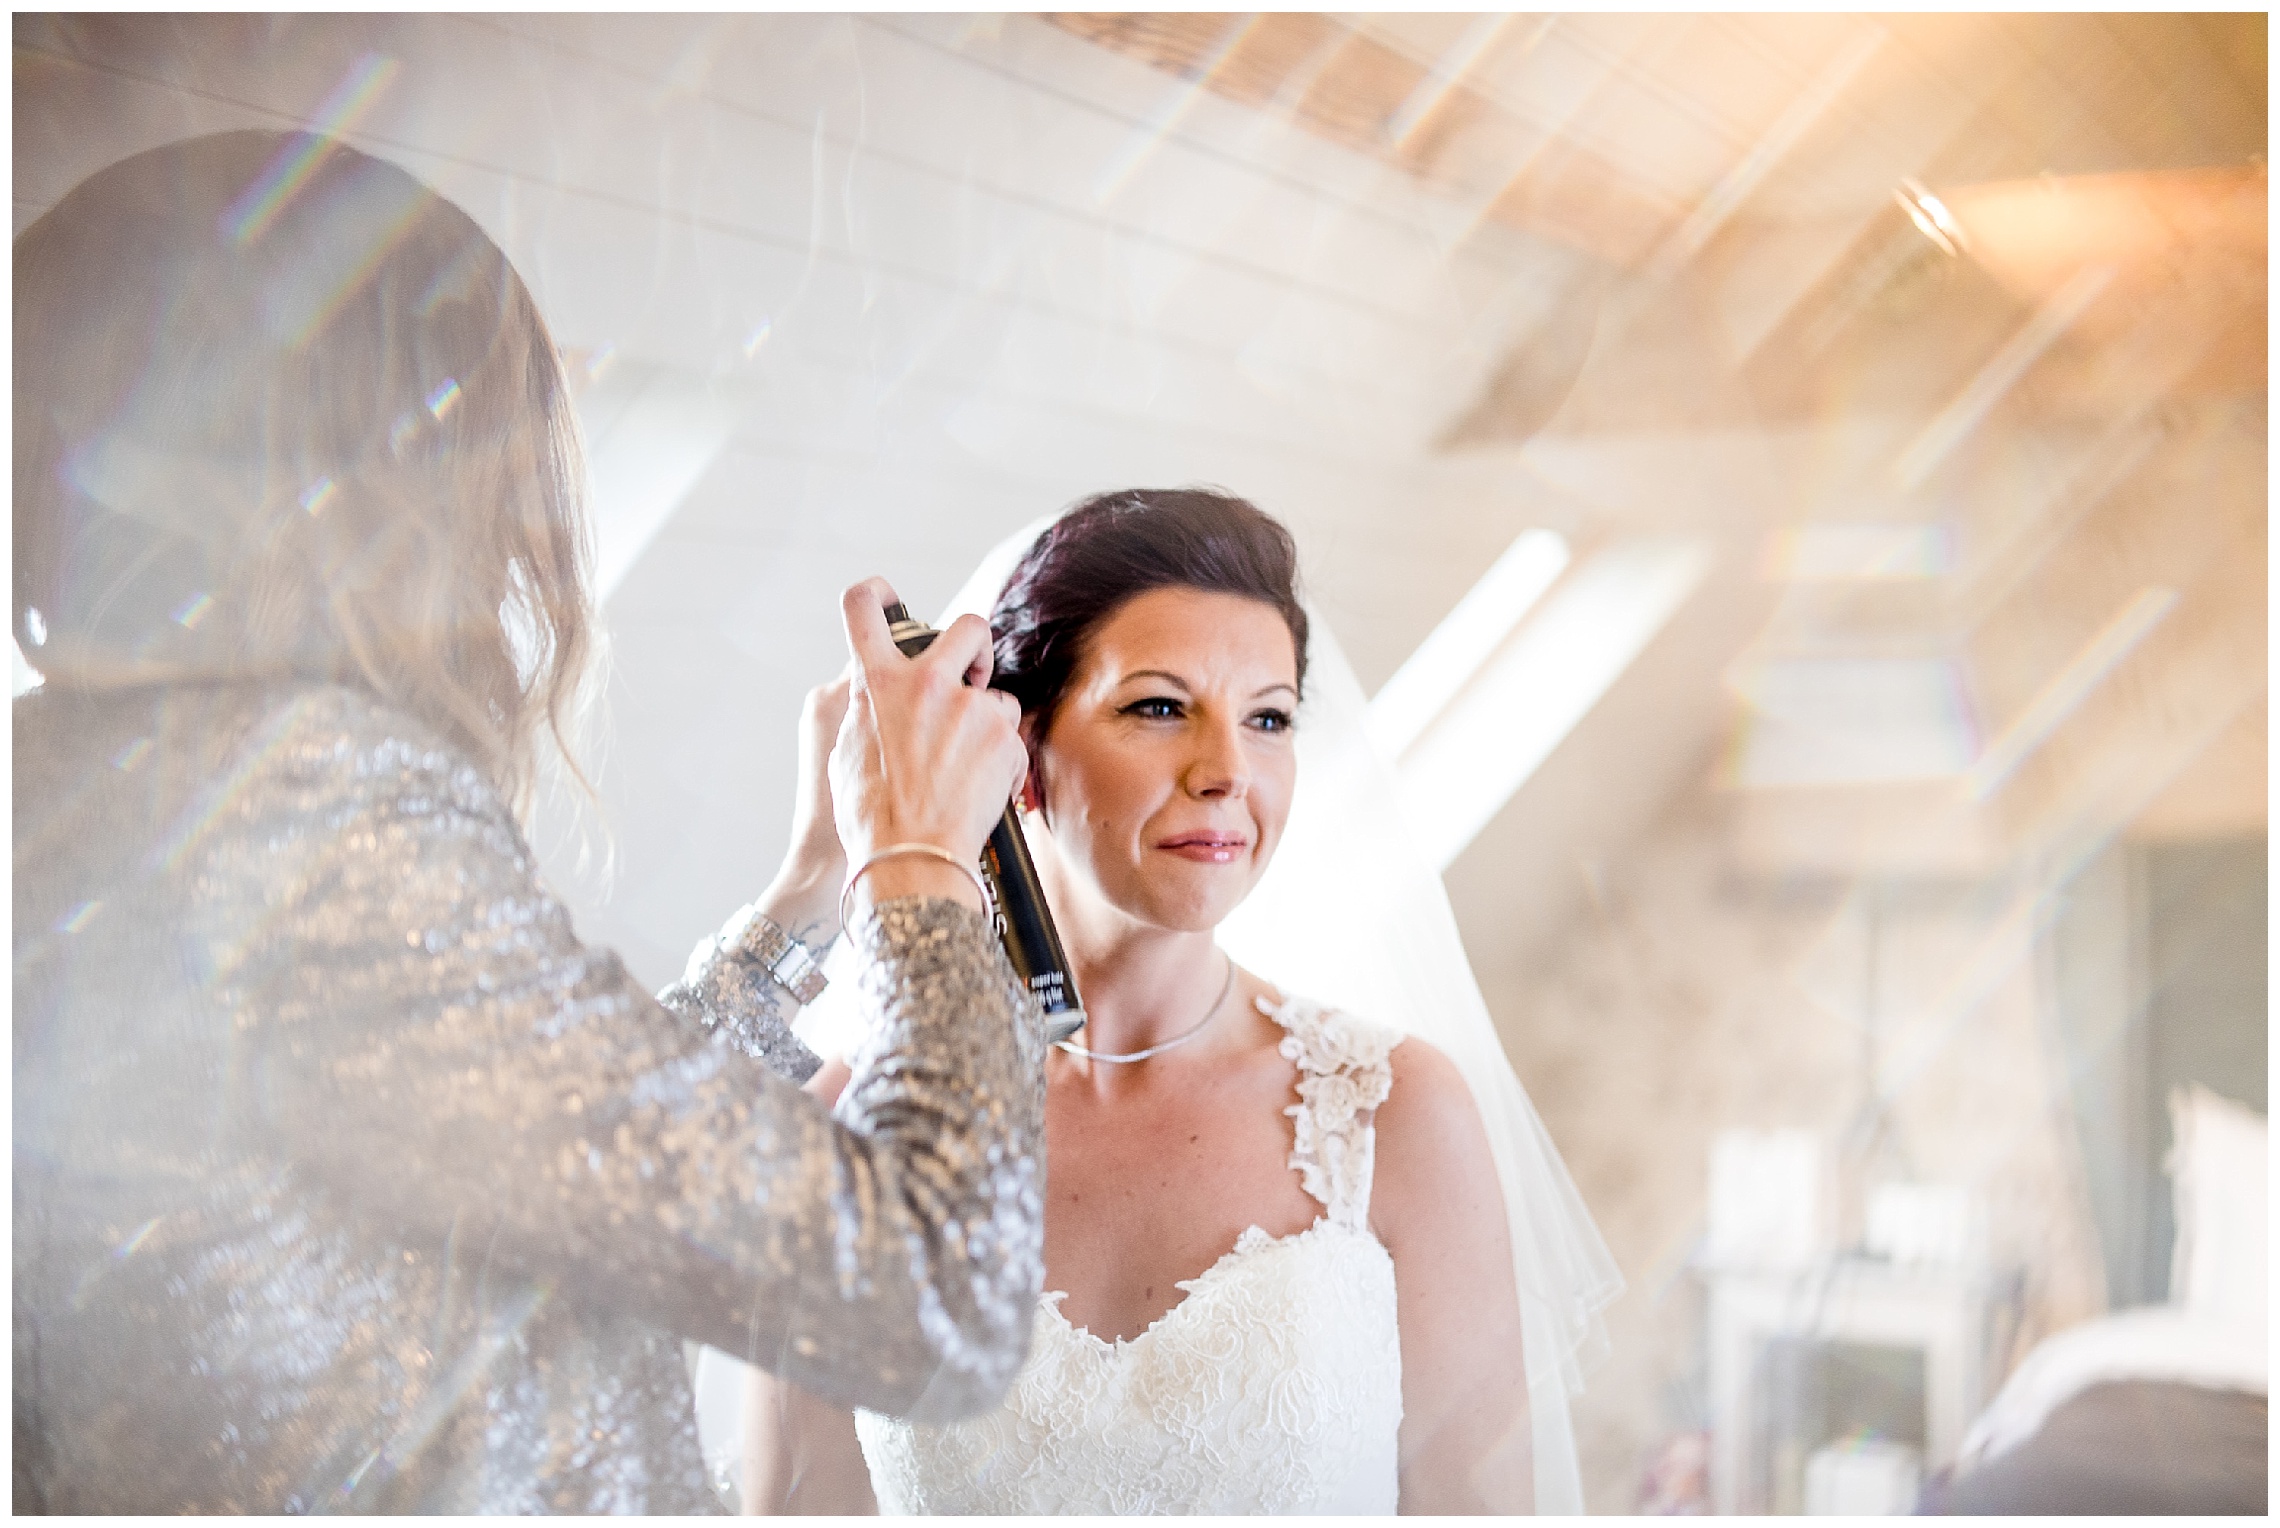 hairdresser applies finishing touches to the brides short hair at south farm